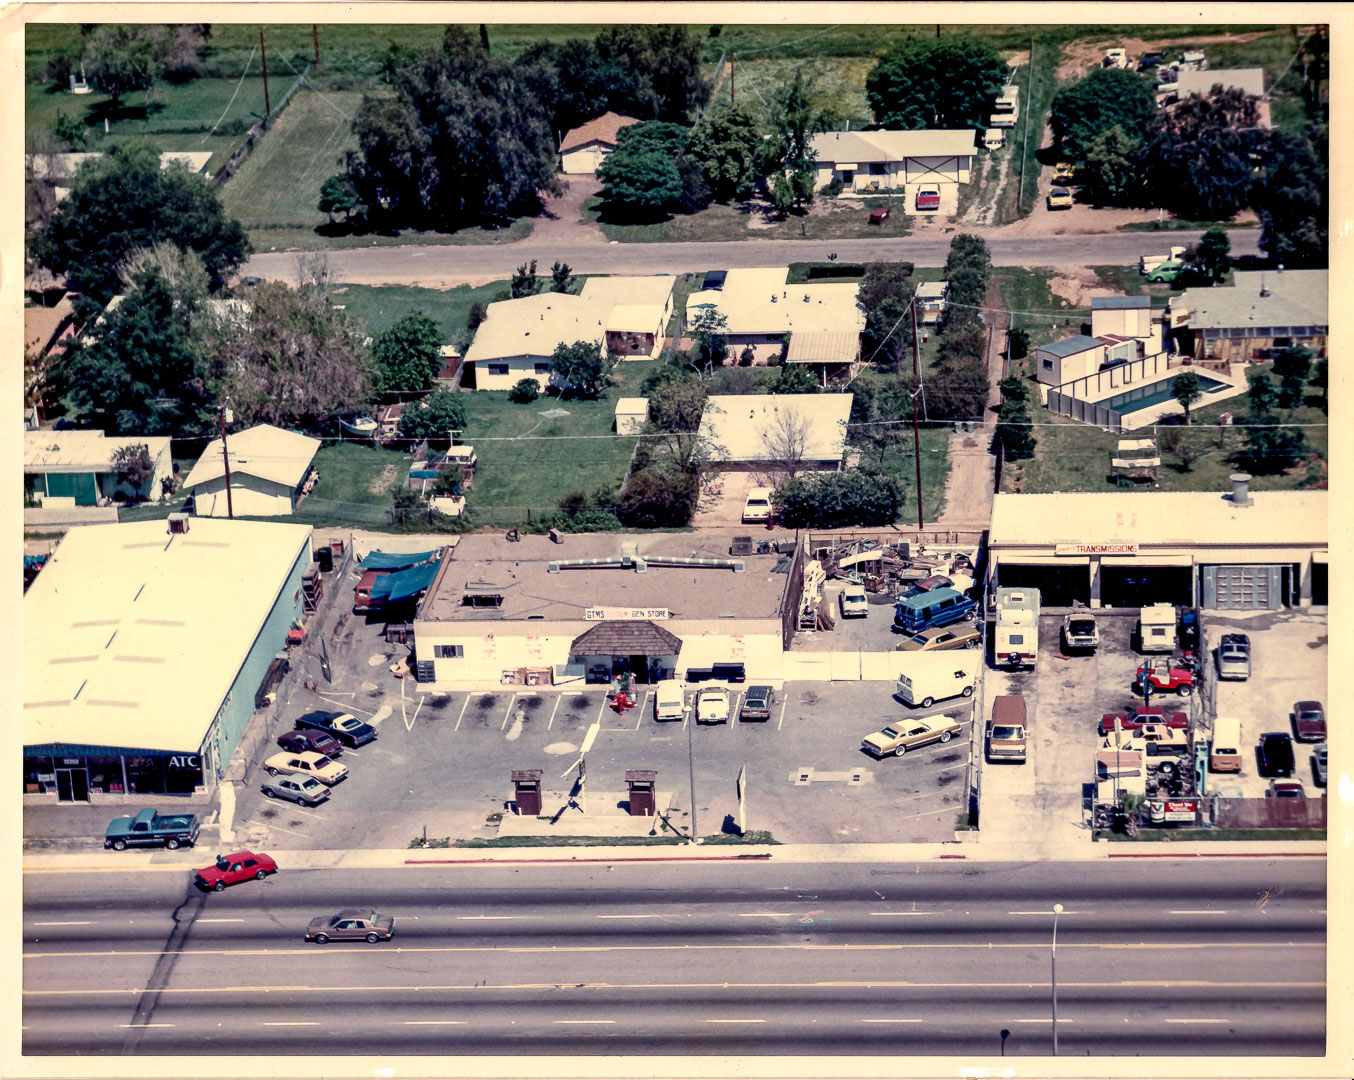 https://www.gtmstores.com/wp/wp-content/uploads/2020/01/first-santee-gtm-store-on-east-mission-gorge-1983-1989.jpg